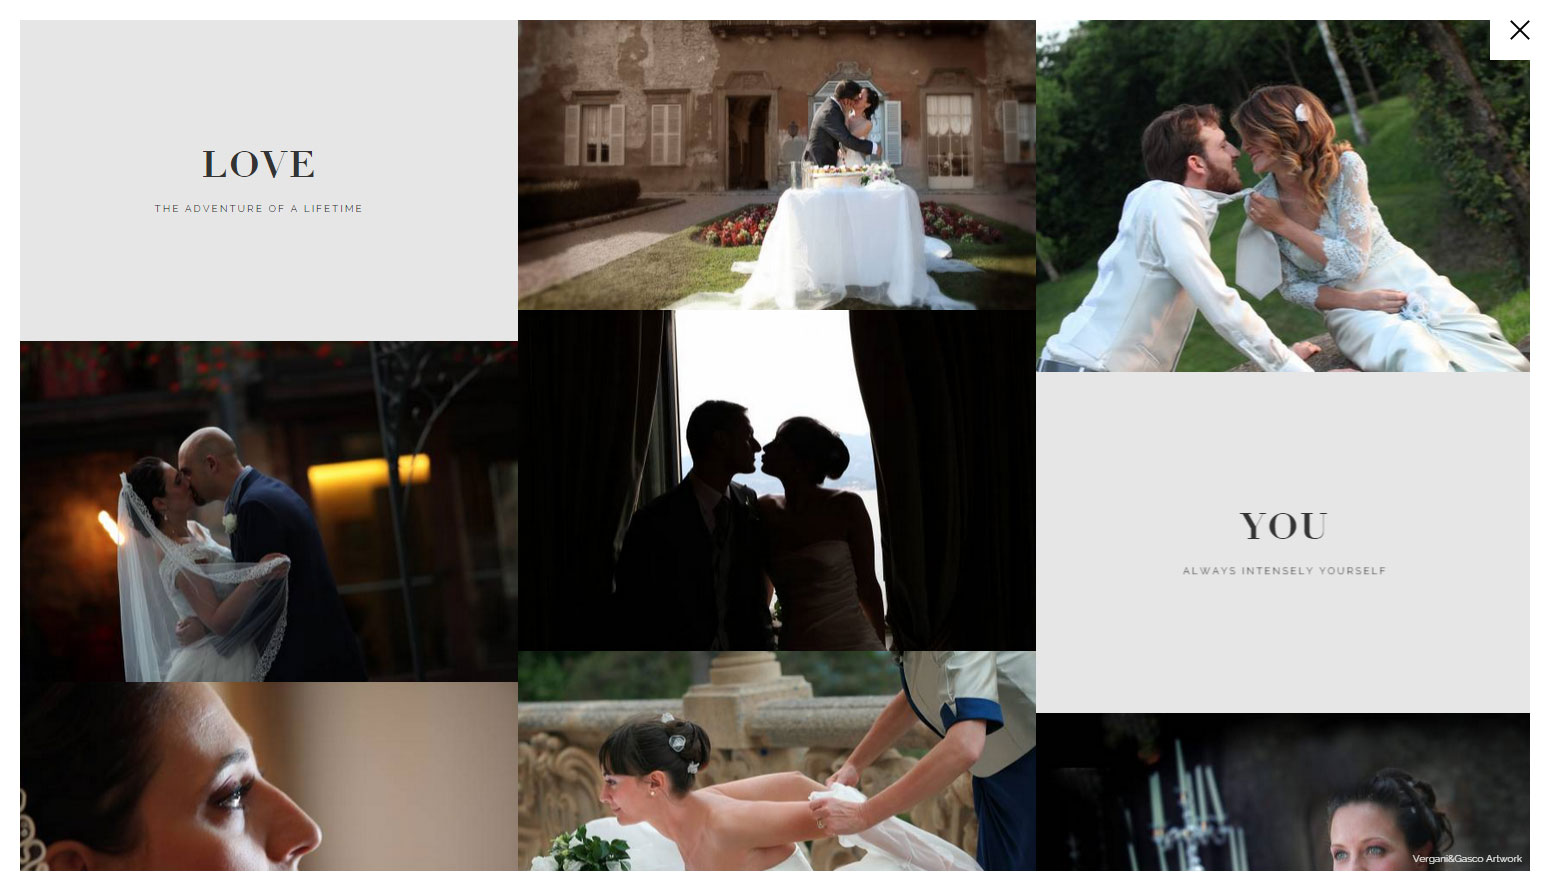 Foto Frigerio - Website of the Day